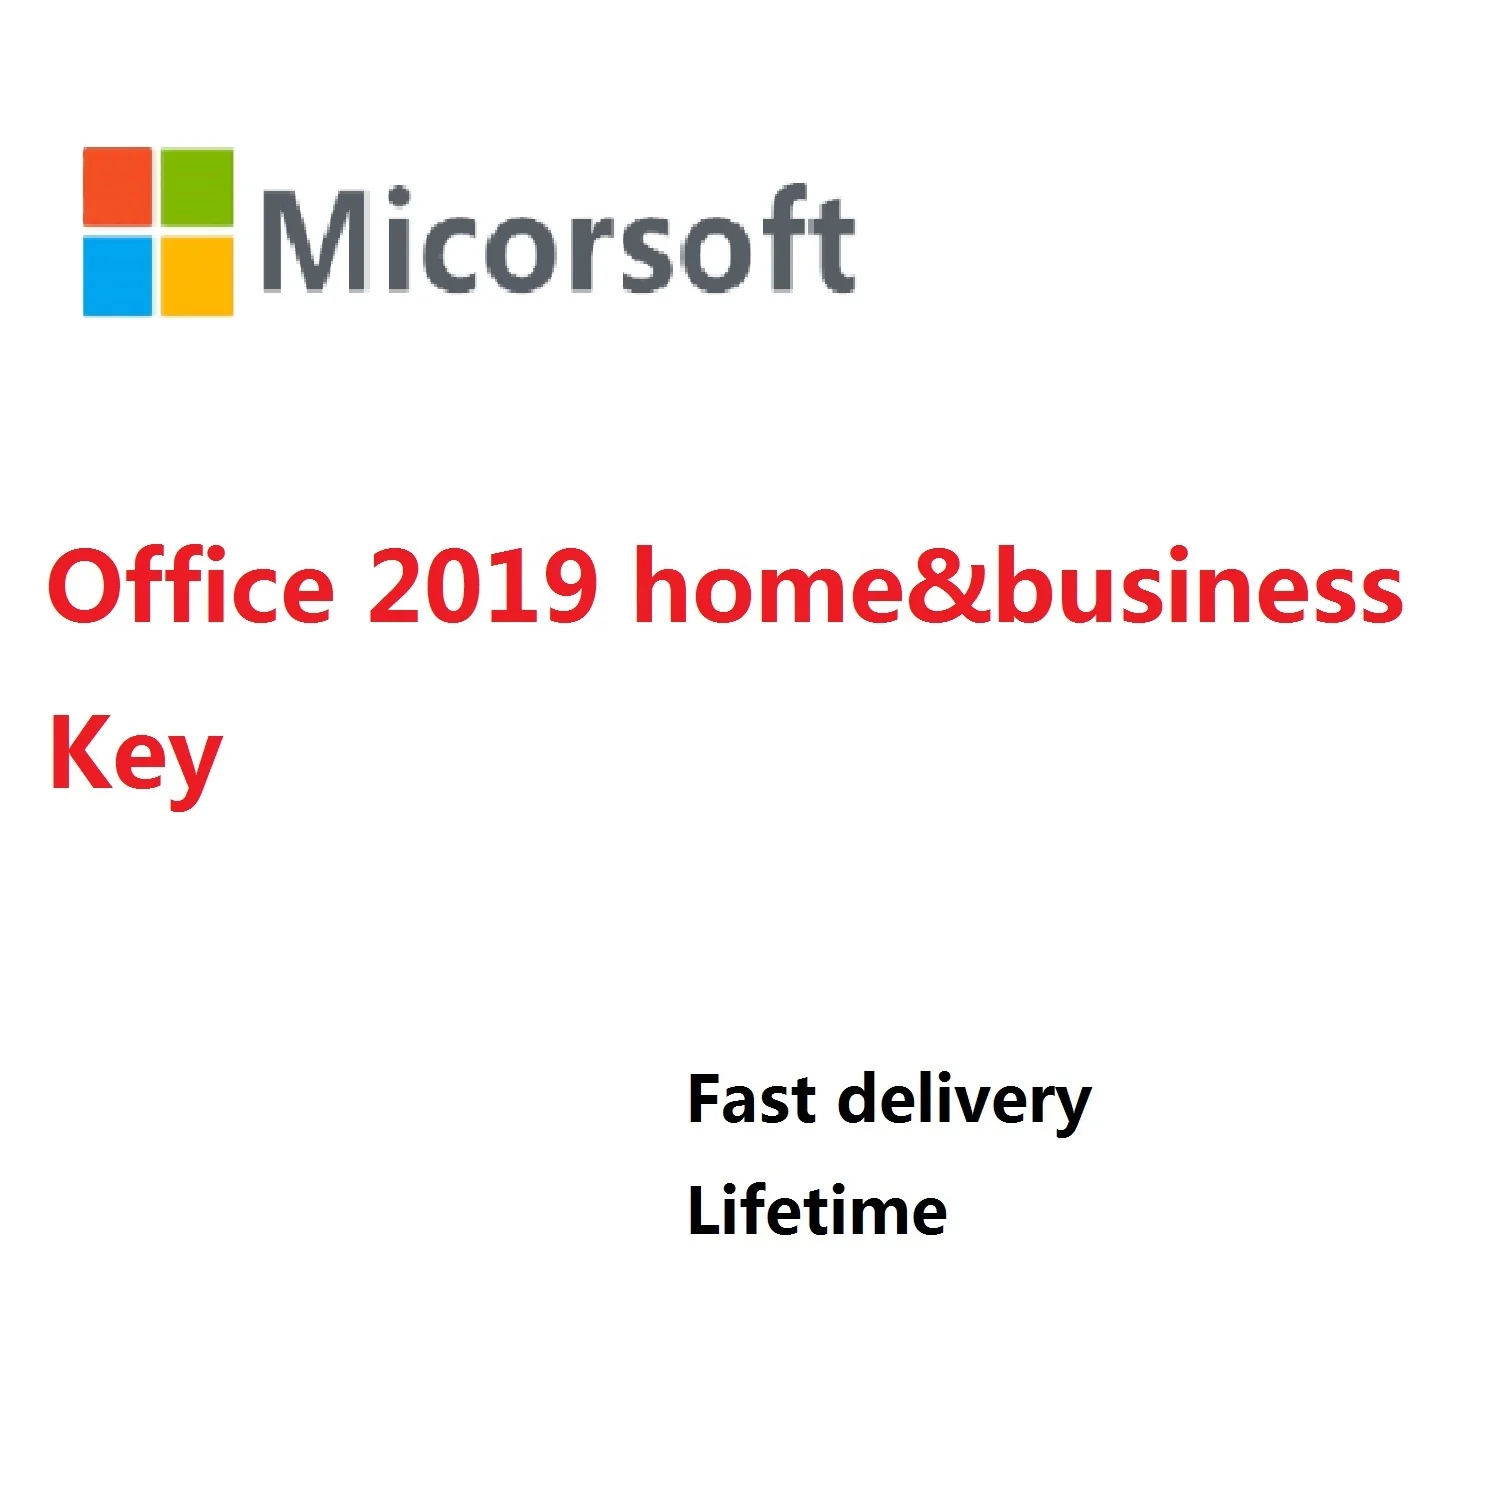 

Microsoft office 2019 home & business product key 100% online activation office 2019 HB office 2019 home and business License